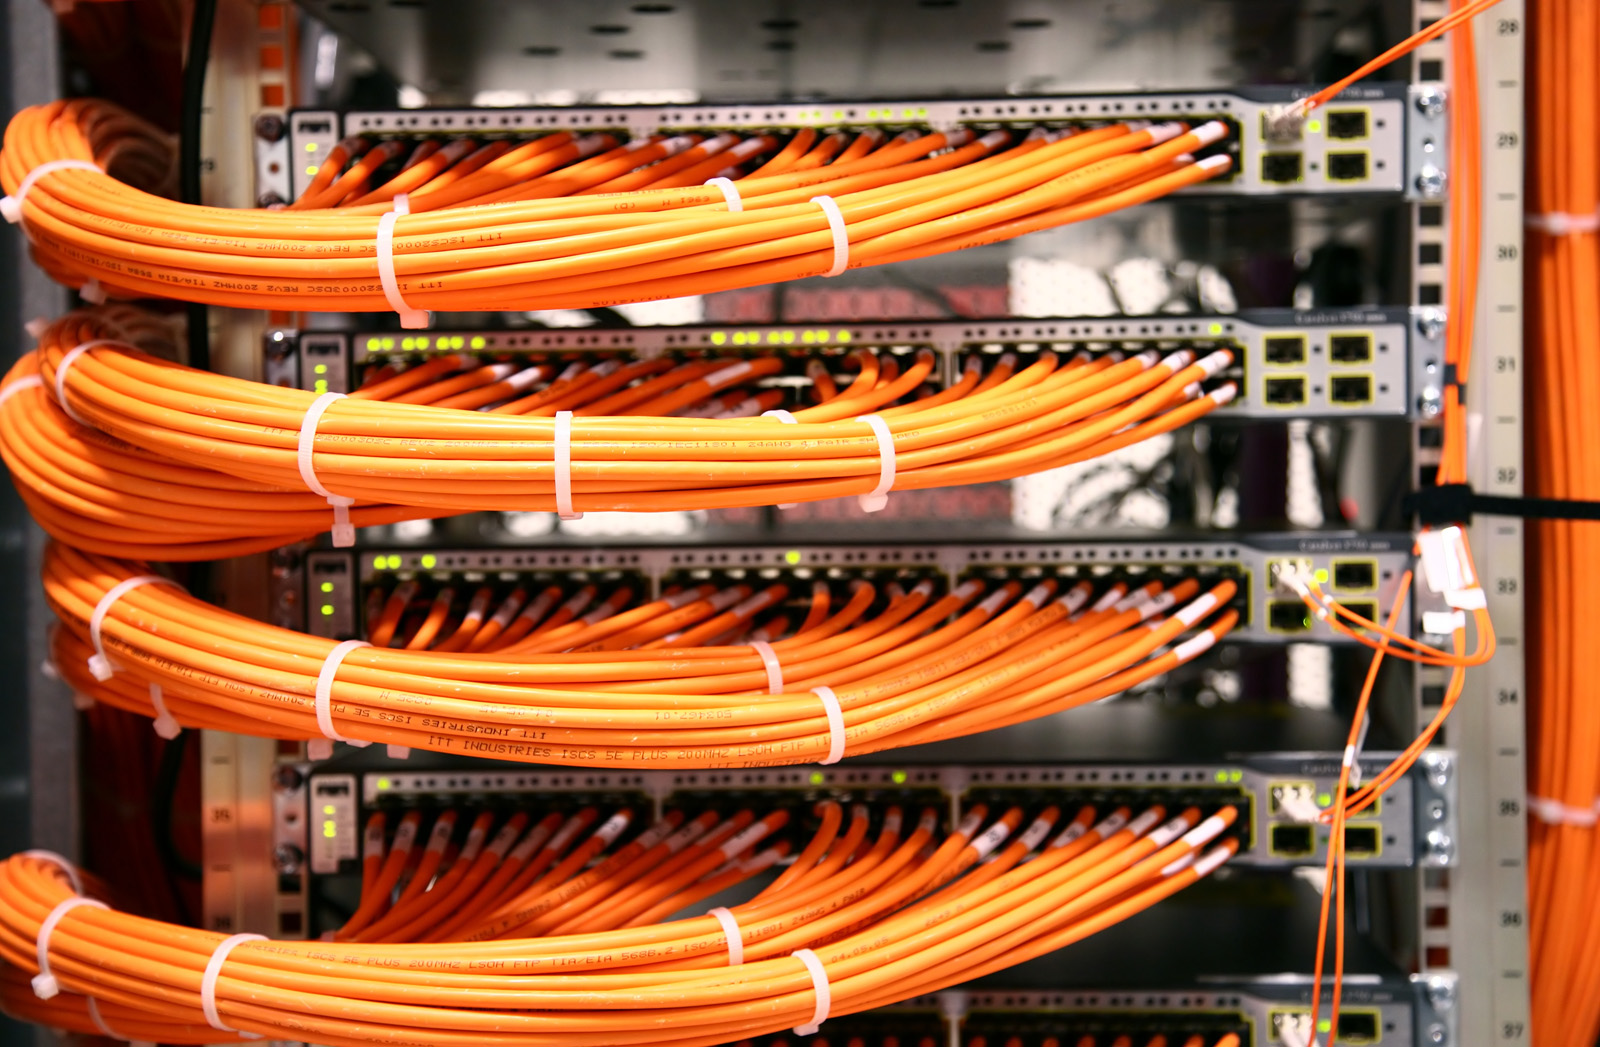 Morgantown Kentucky High Quality Voice & Data Network Cabling Contractor